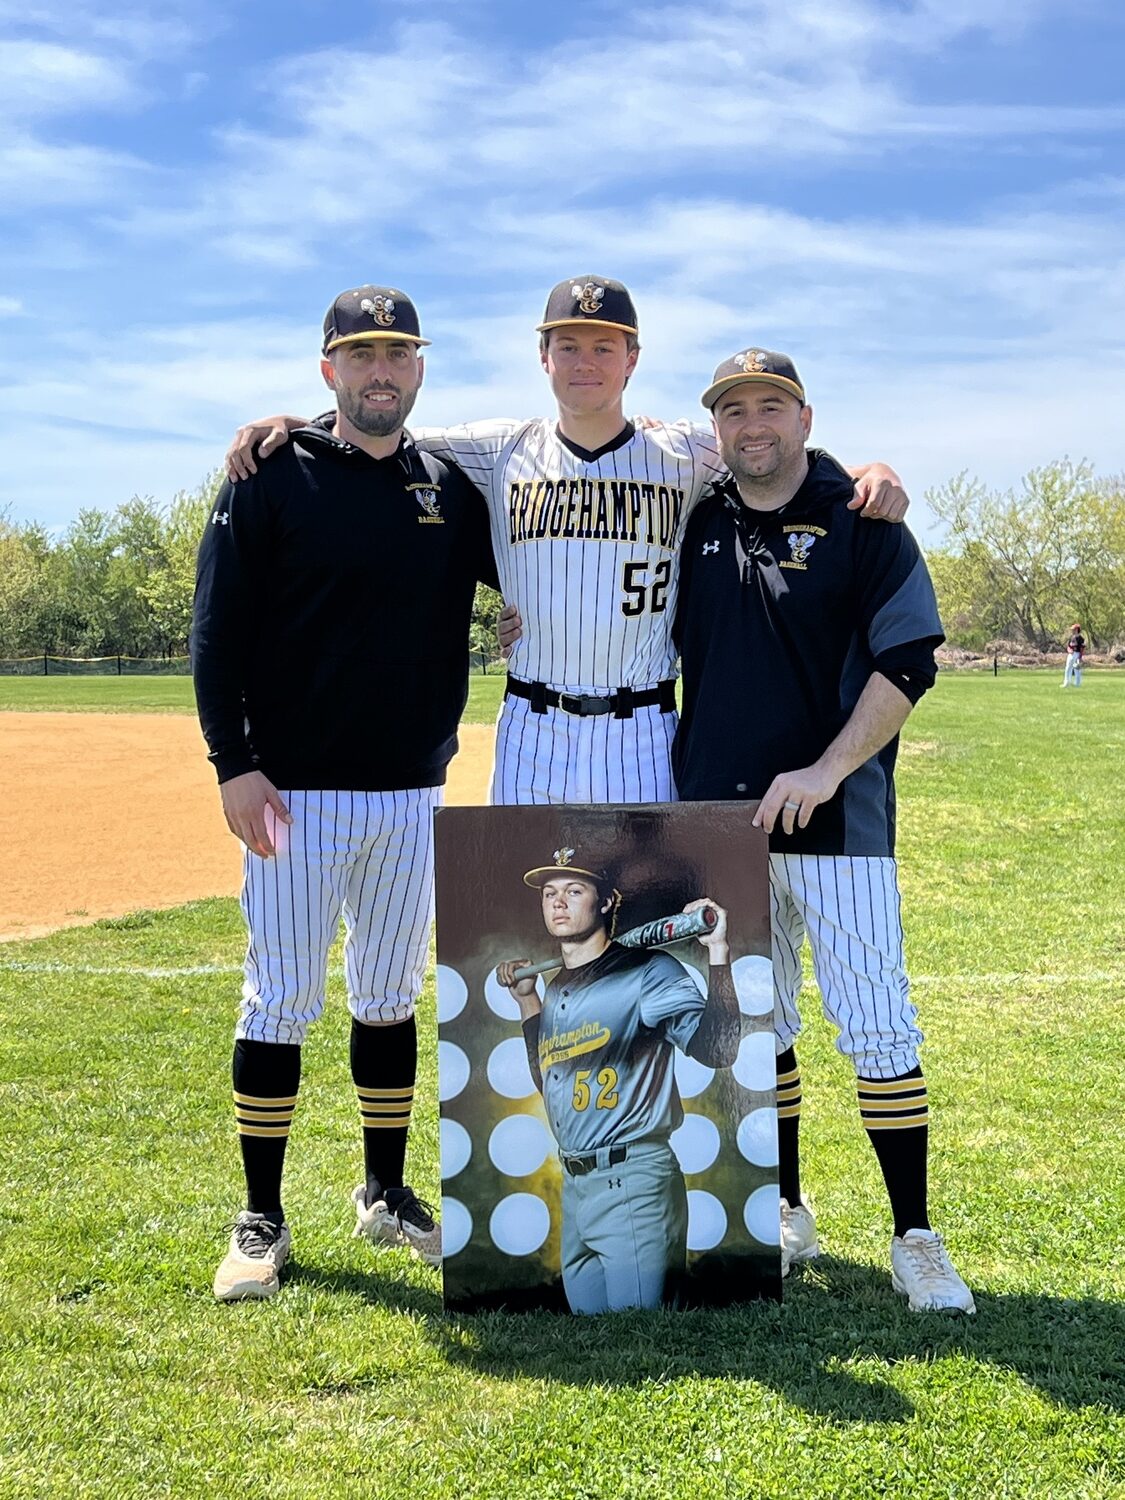 Milo Tompkins was honored as the Bridgehampton/Ross baseball teams lone senior captain prior to playing Amityville on Saturday.  JULIE FOARD